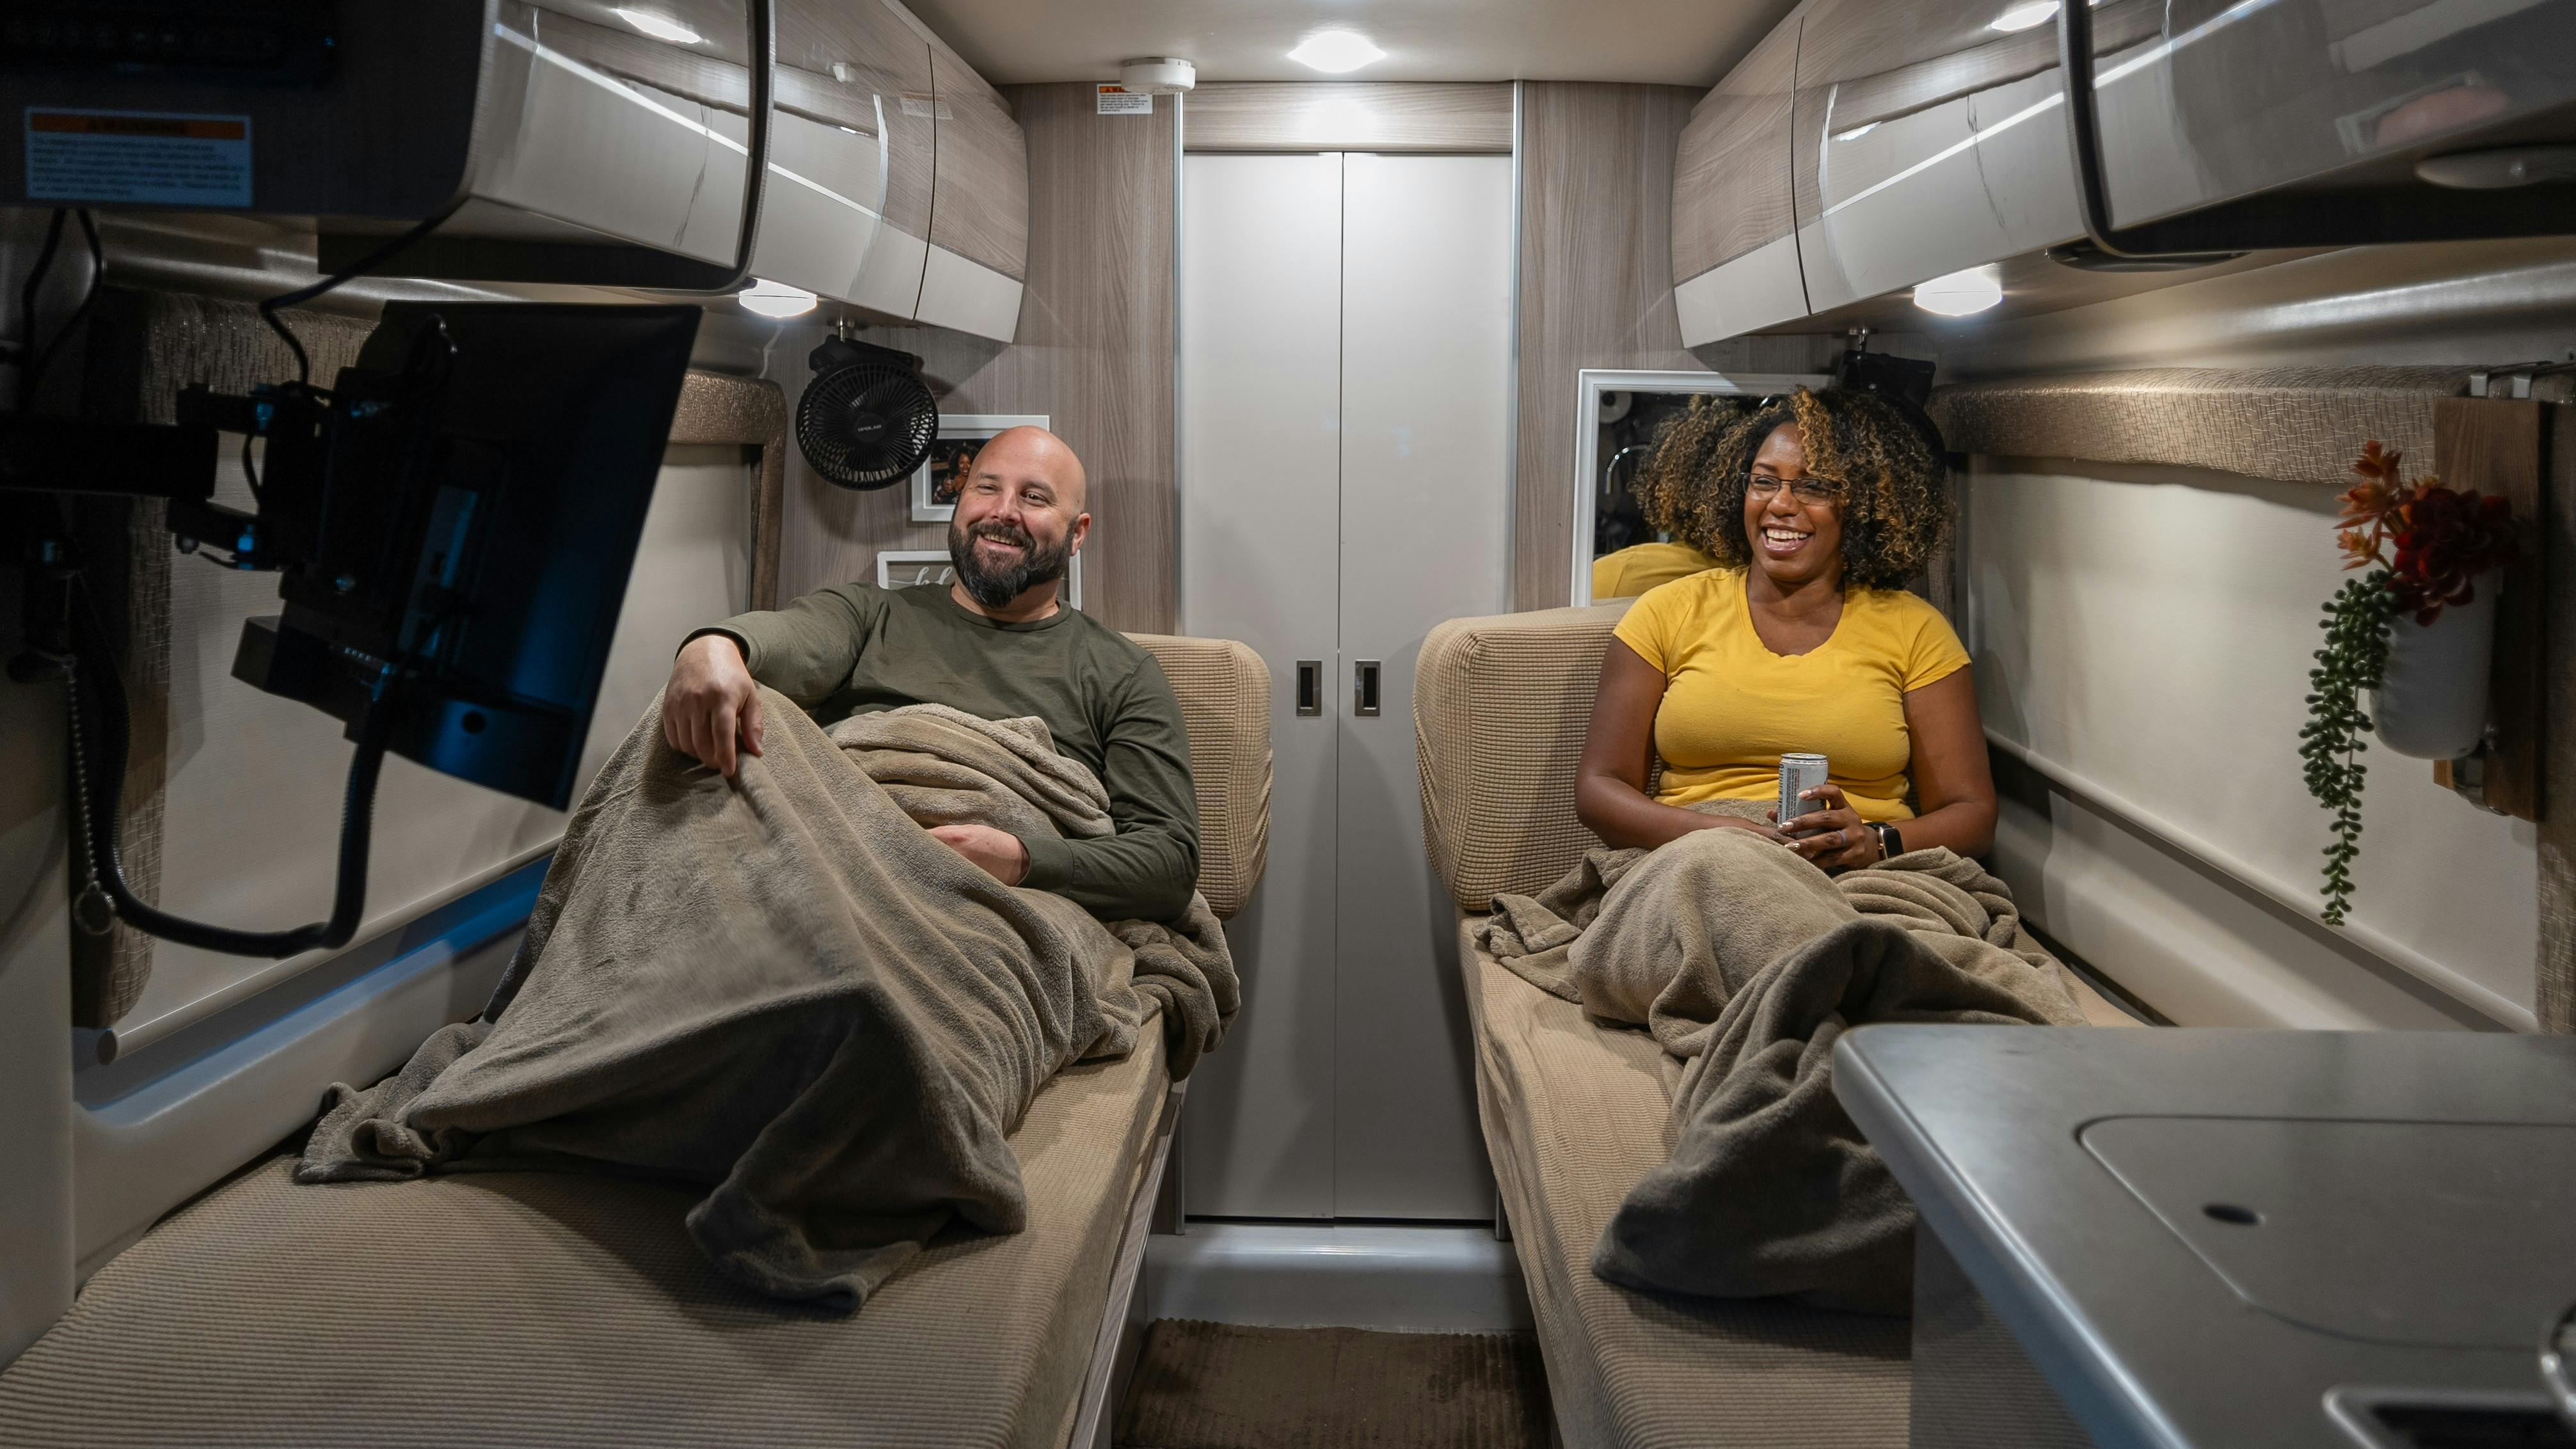 A TV on a swivel-mount and built-in Wi-Fi makes movies in bed easy inside Gabe and Rocio Rivero's Thor Motor Coach Sequence.